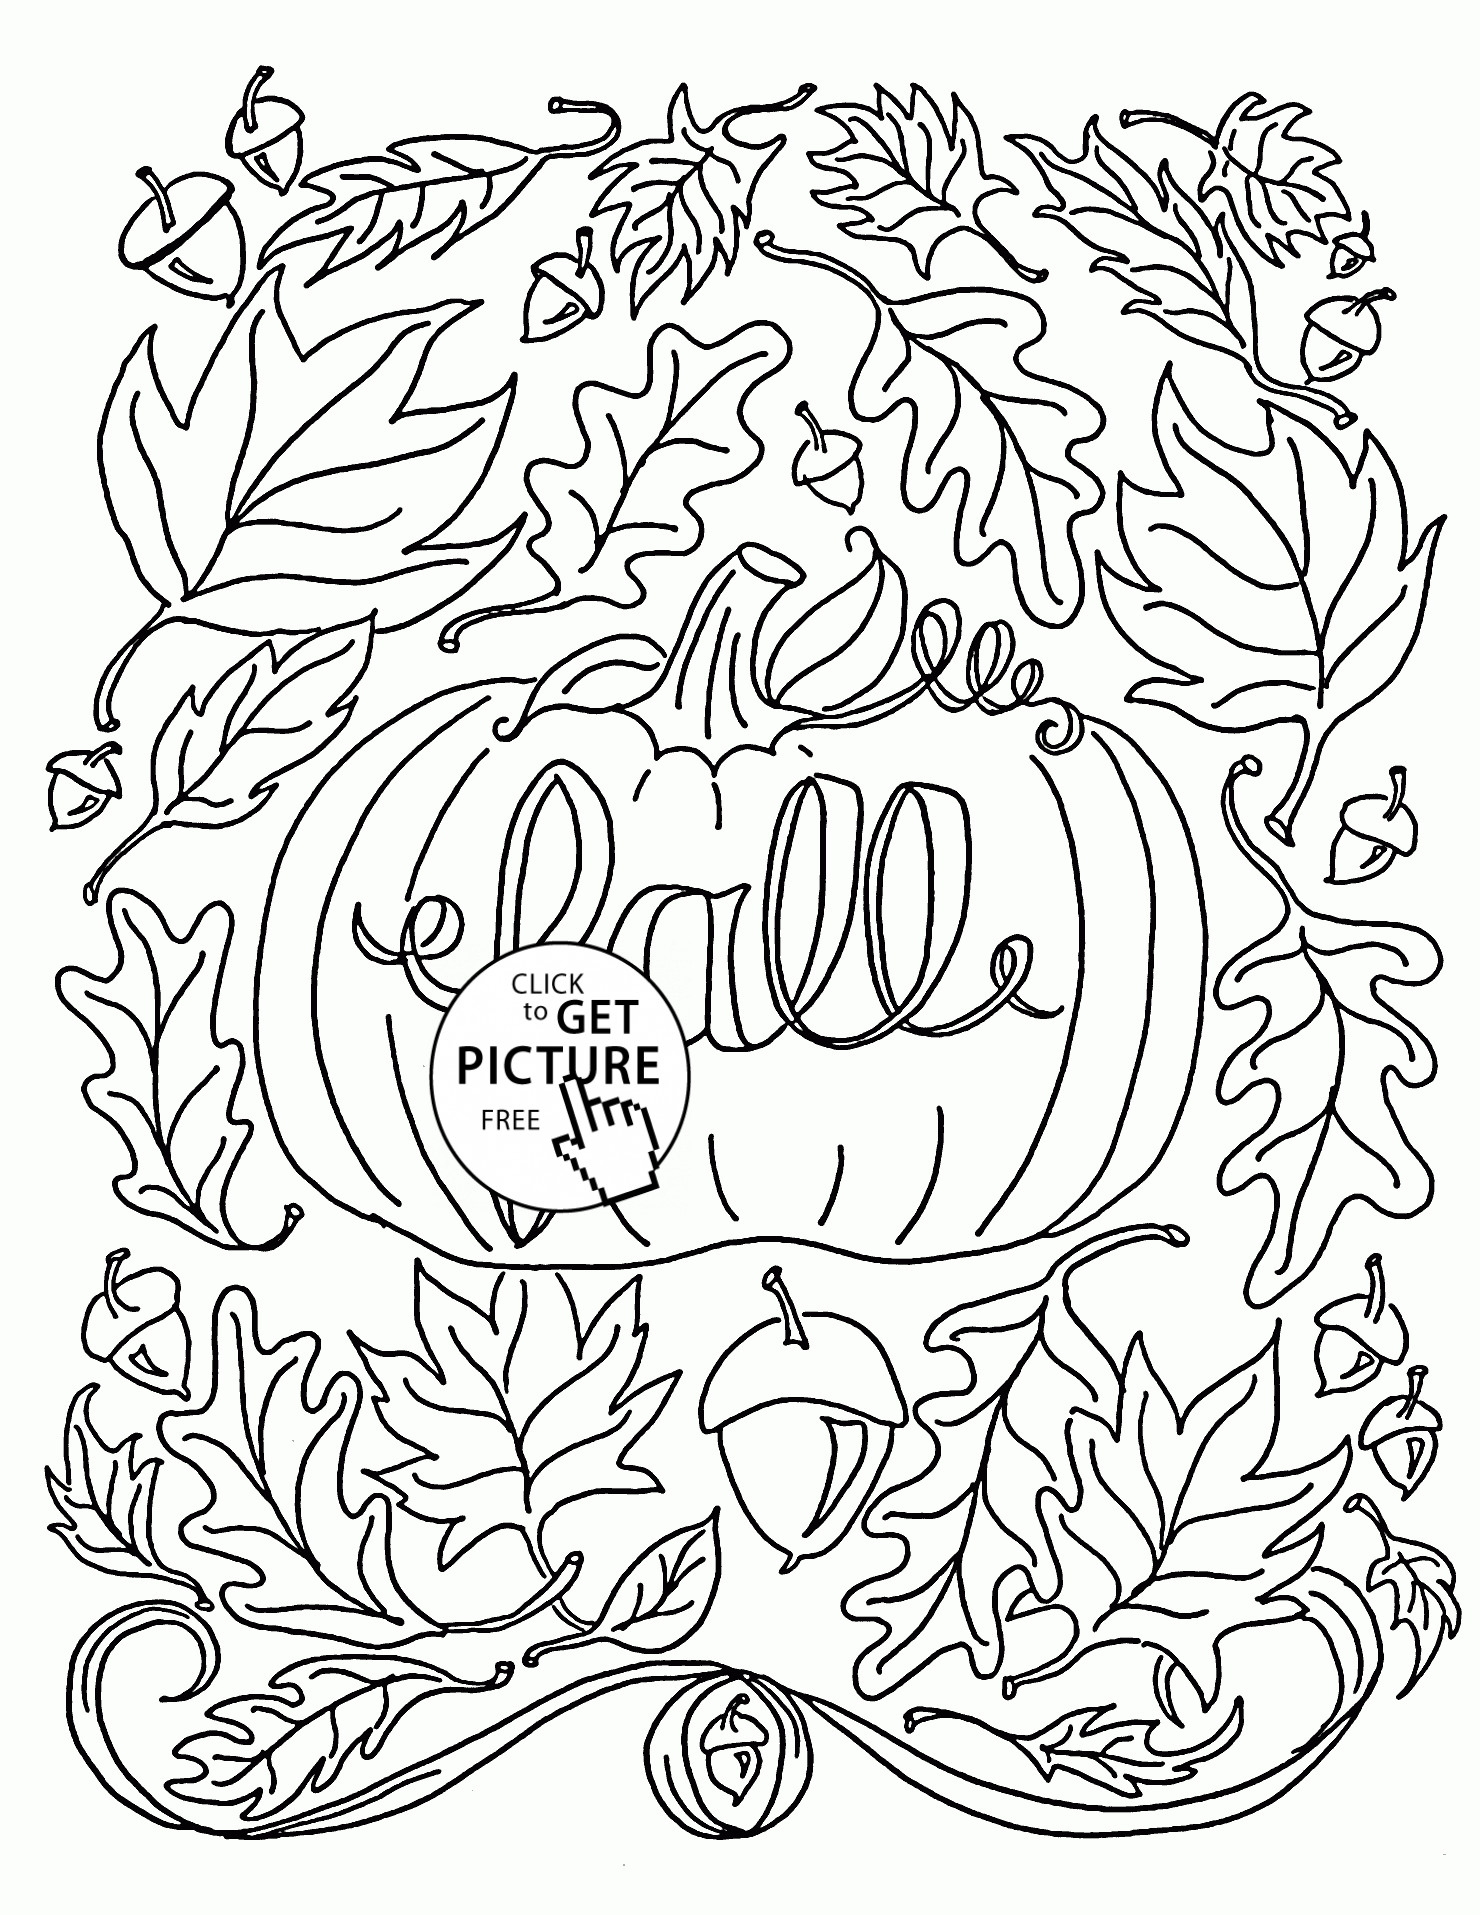 Coloring Pages For Kids Fall
 It is Fall coloring pages for kids autumn printables free